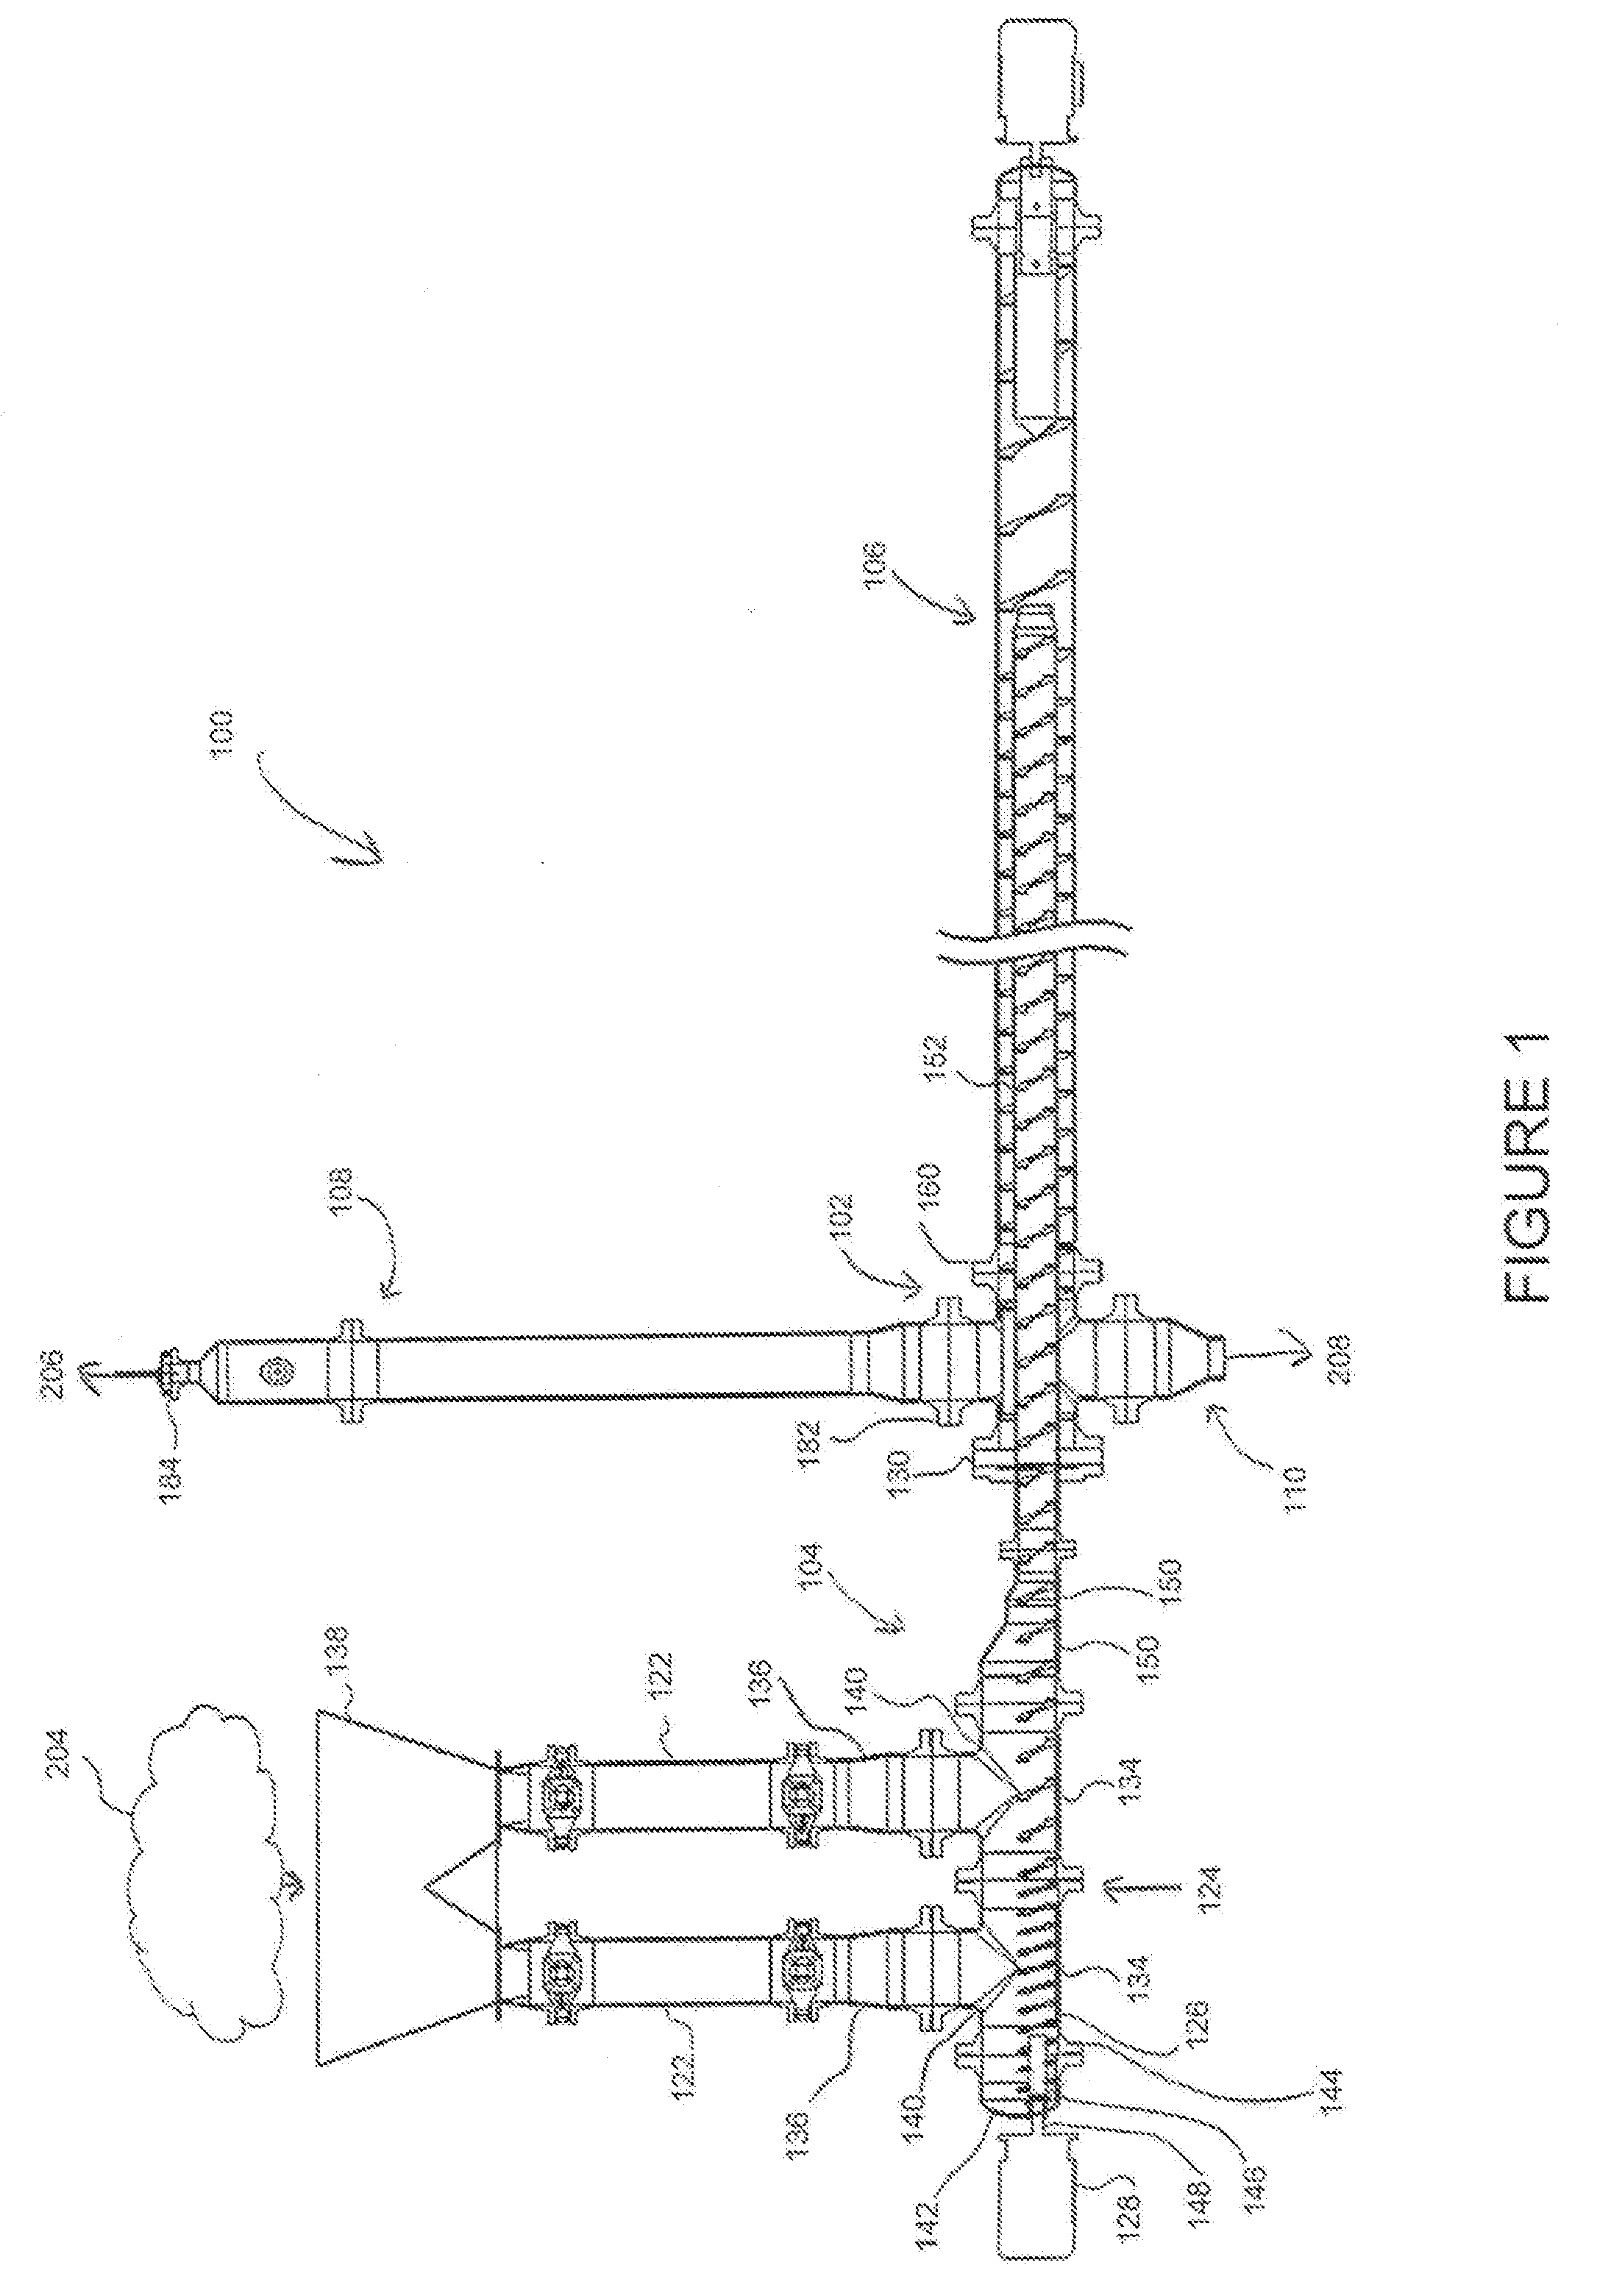 Reciprocating reactor and methods for thermal decomposition of carbonaceous feedstock